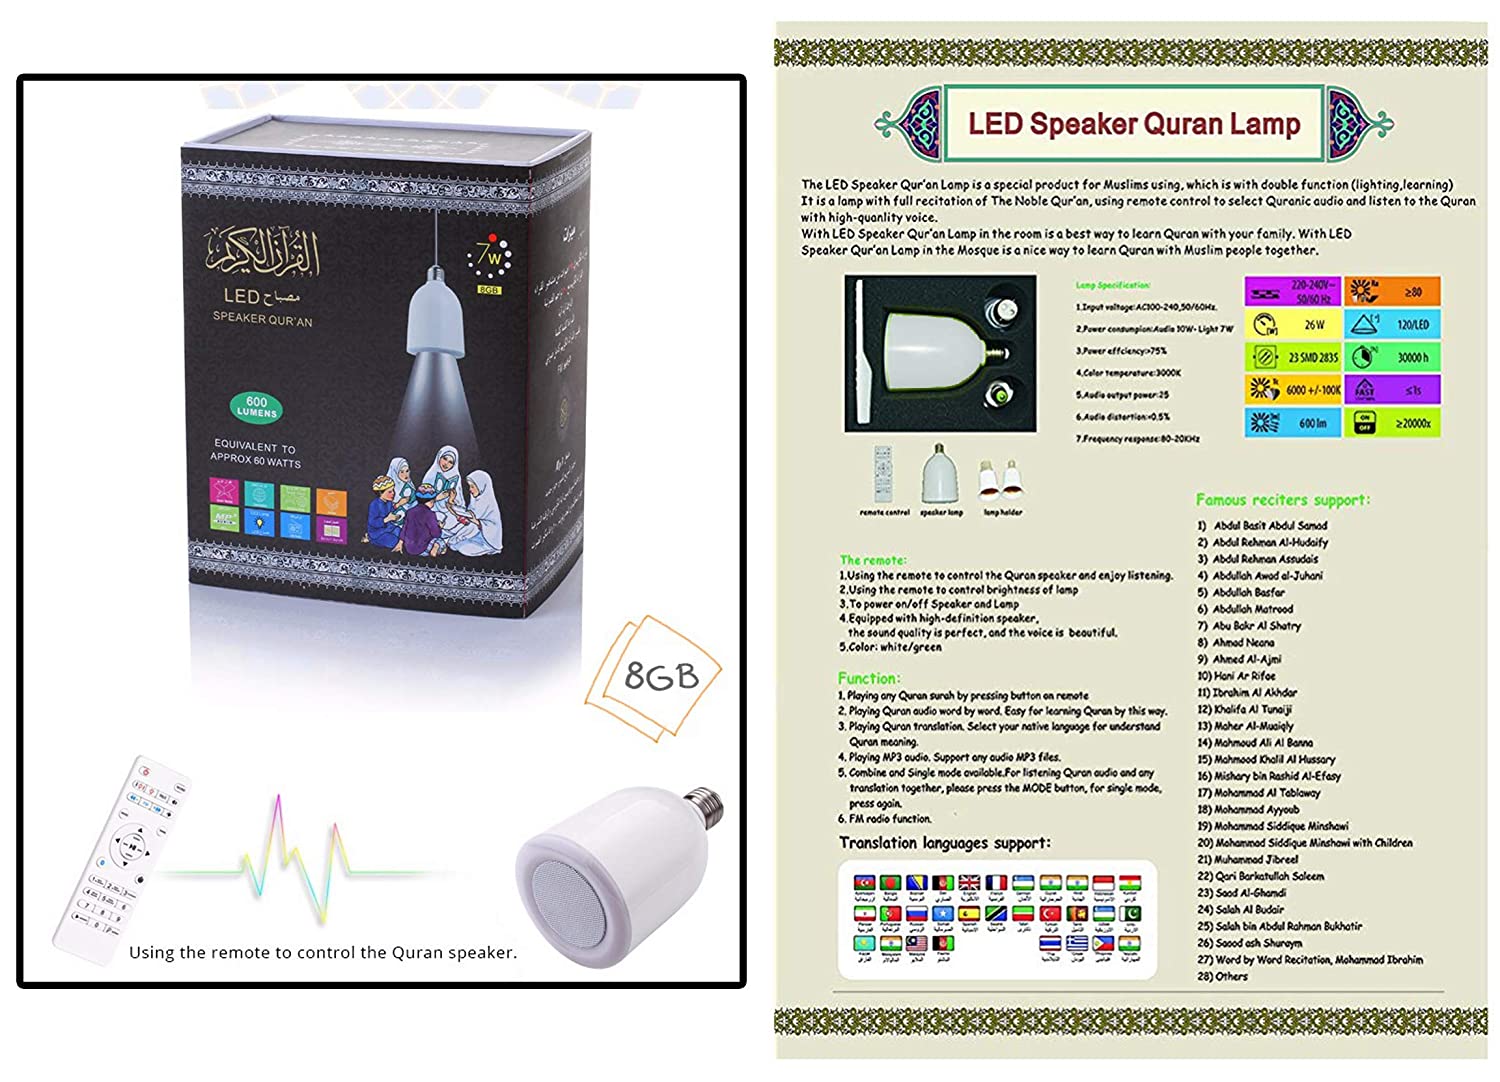 Simply Islam Quran Lamp LED Speaker 15 Qaris and 24 Languages with Remote - 1PaysLess.com